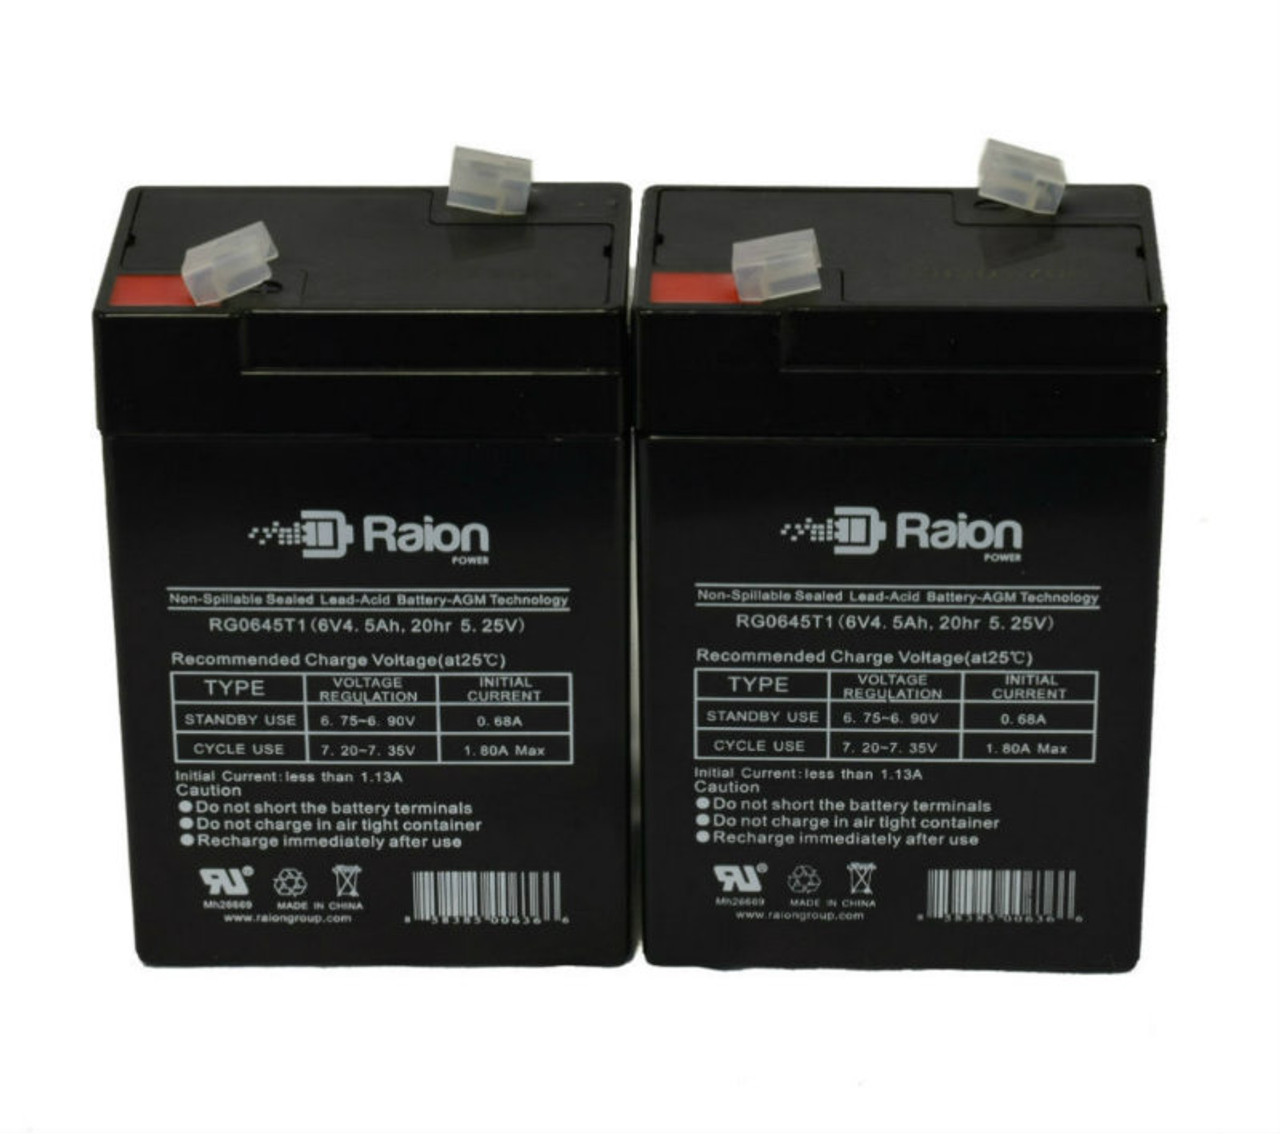 Raion Power RG0645T1 6V 4.5Ah Replacement Medical Equipment Battery for Alaris Medical 4400 Vital Check Monitor - 2 Pack